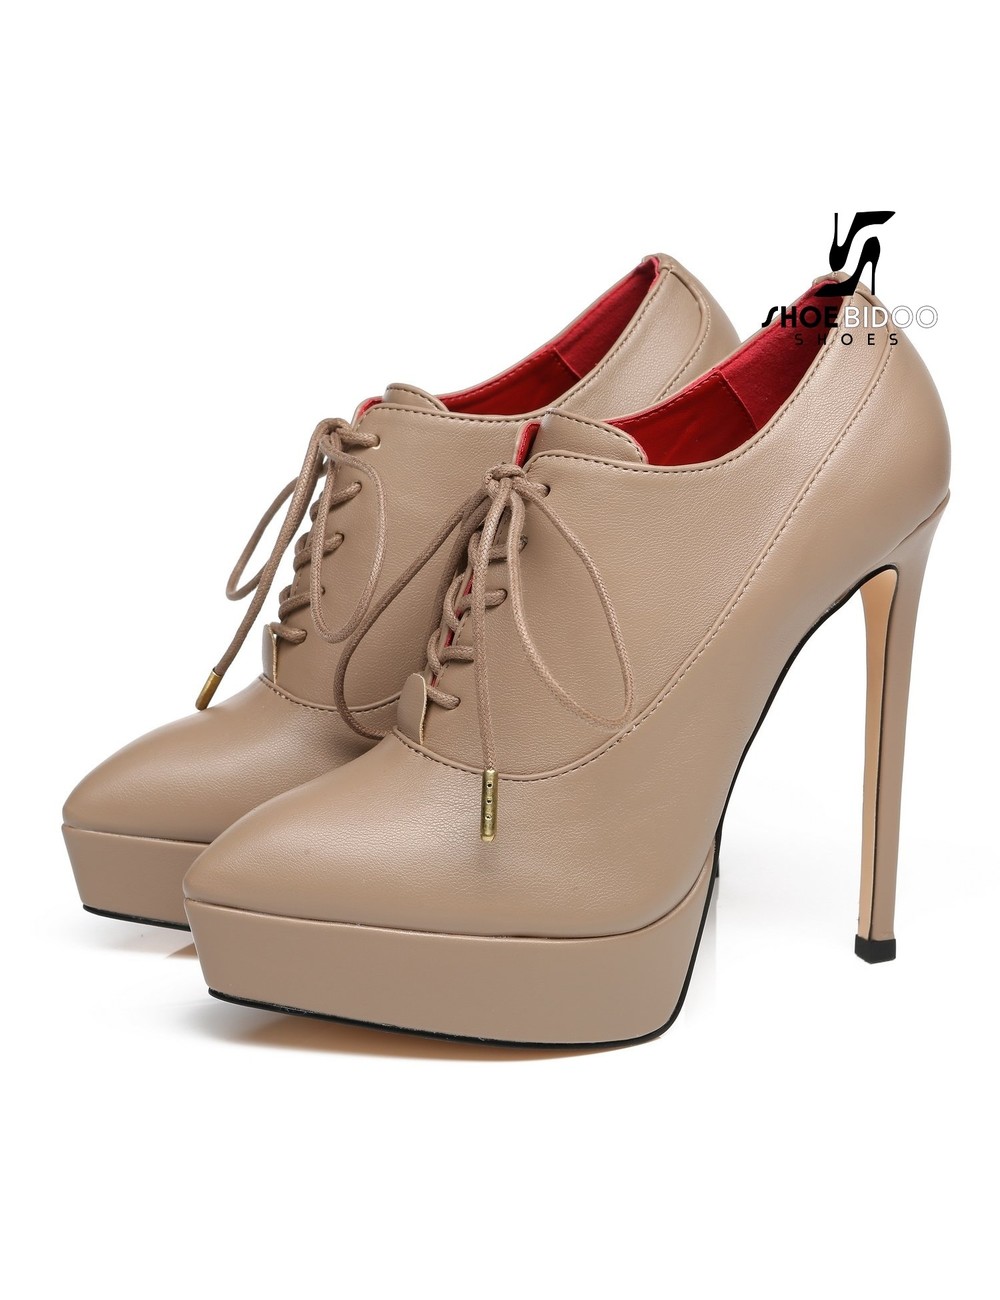 Giaro Giaro Platform lace up pumps SNUG in Taupe with red lining